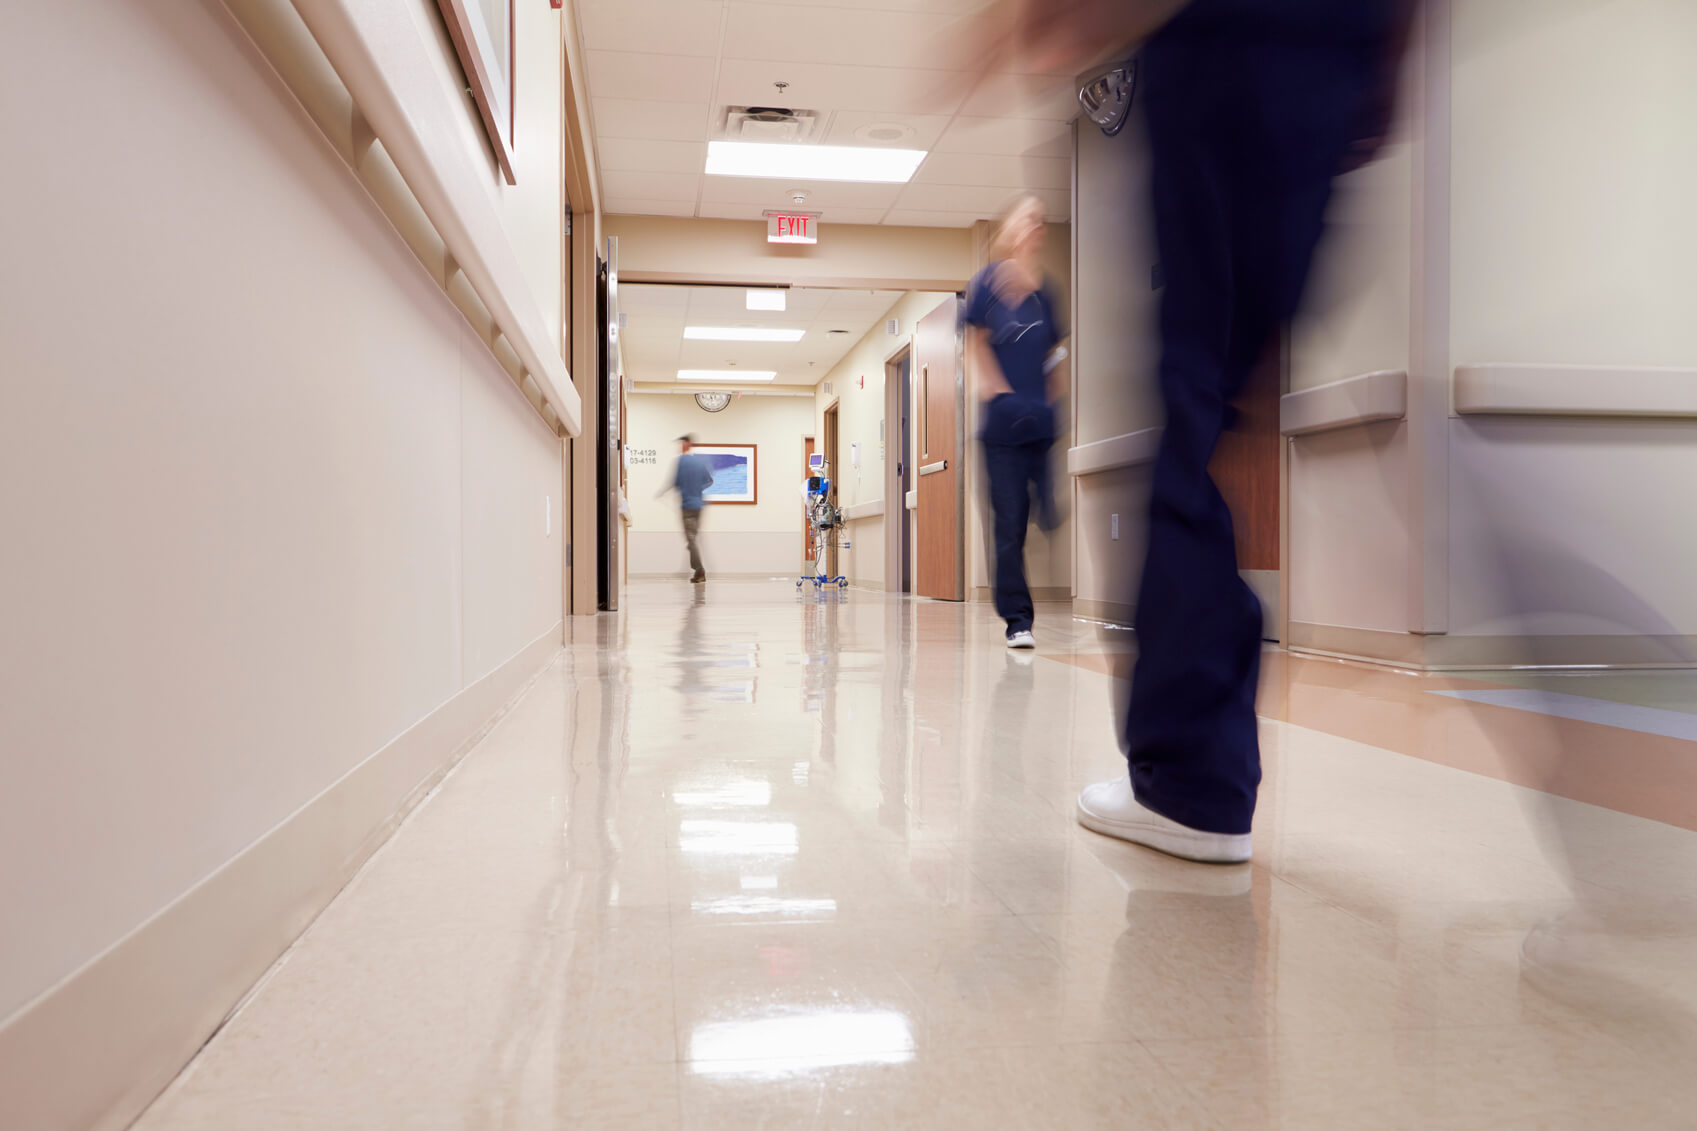 A nursing assistant runs through a corridor, the setting to the accident at work claim